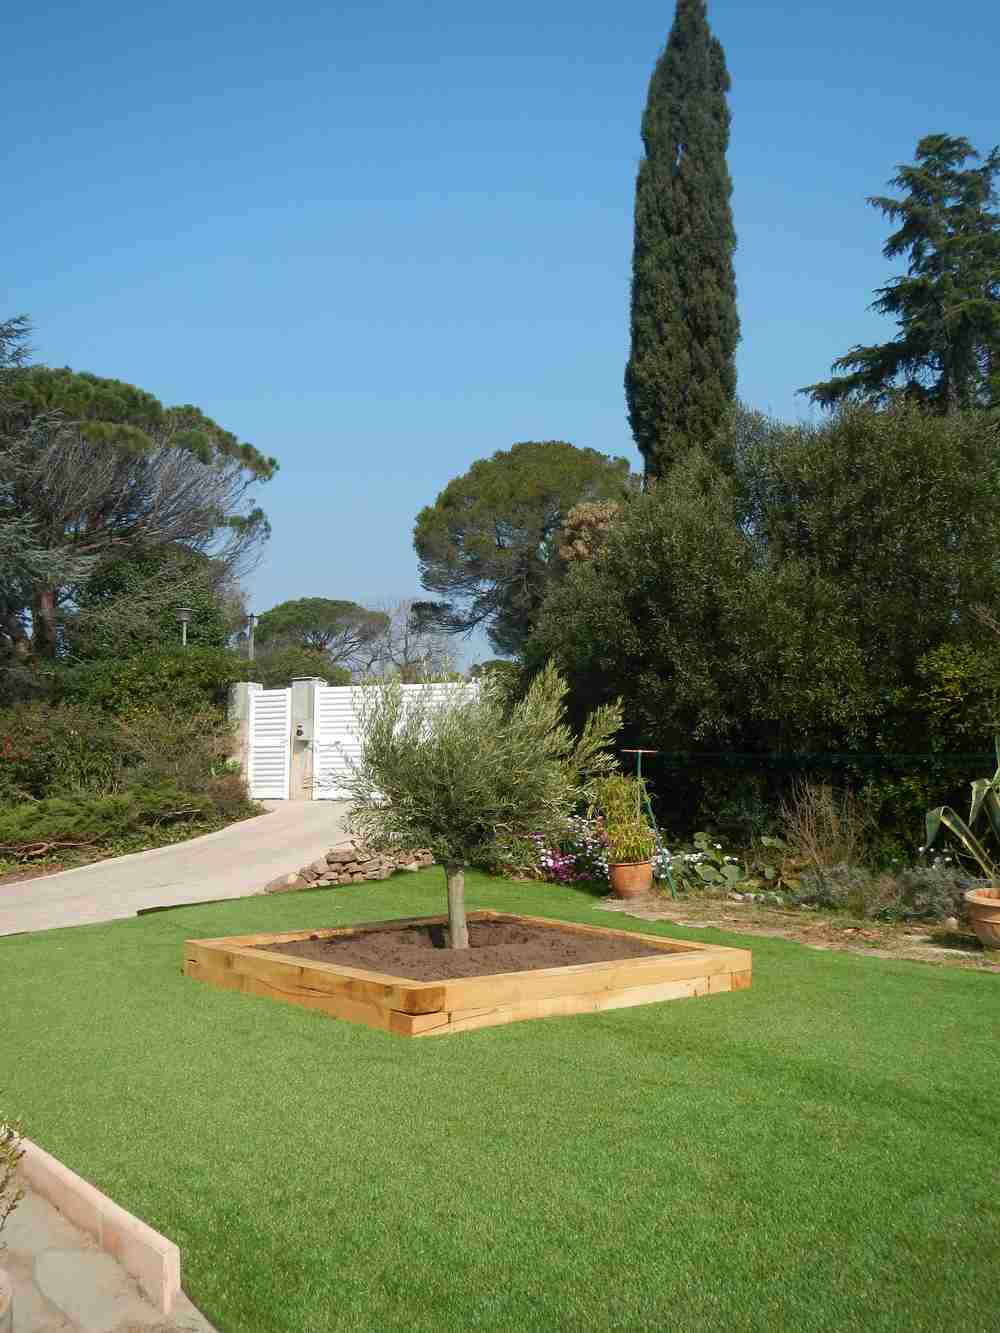 8 people villa rental with pool in Frjus Var French riviera.